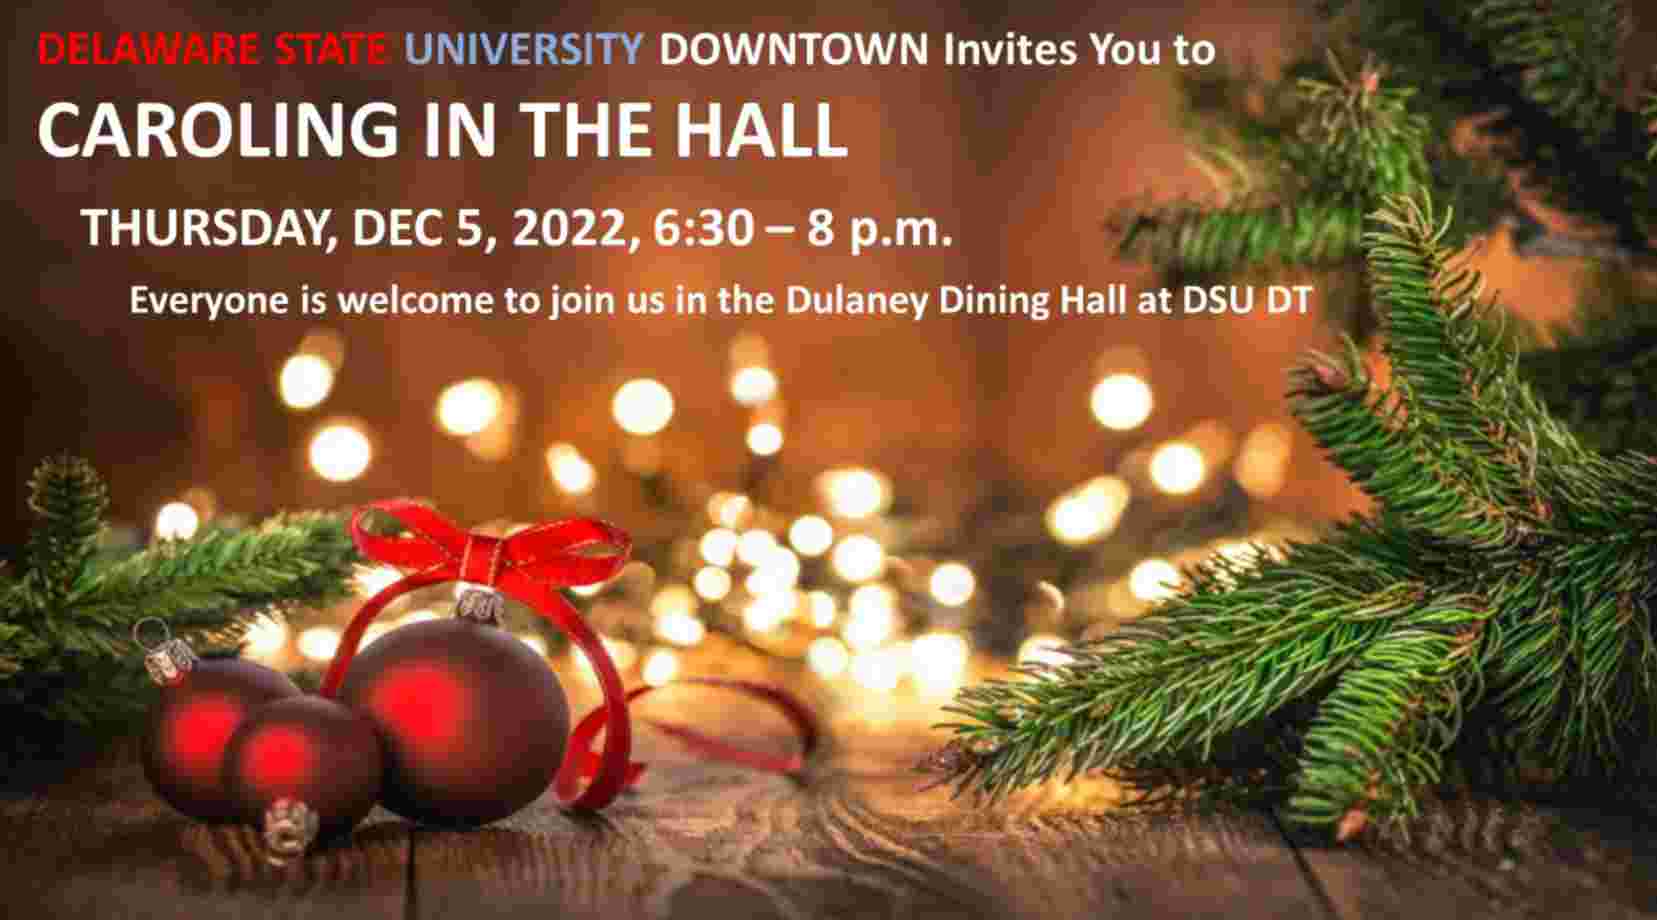 Caroling in the hall at DSU Downtown